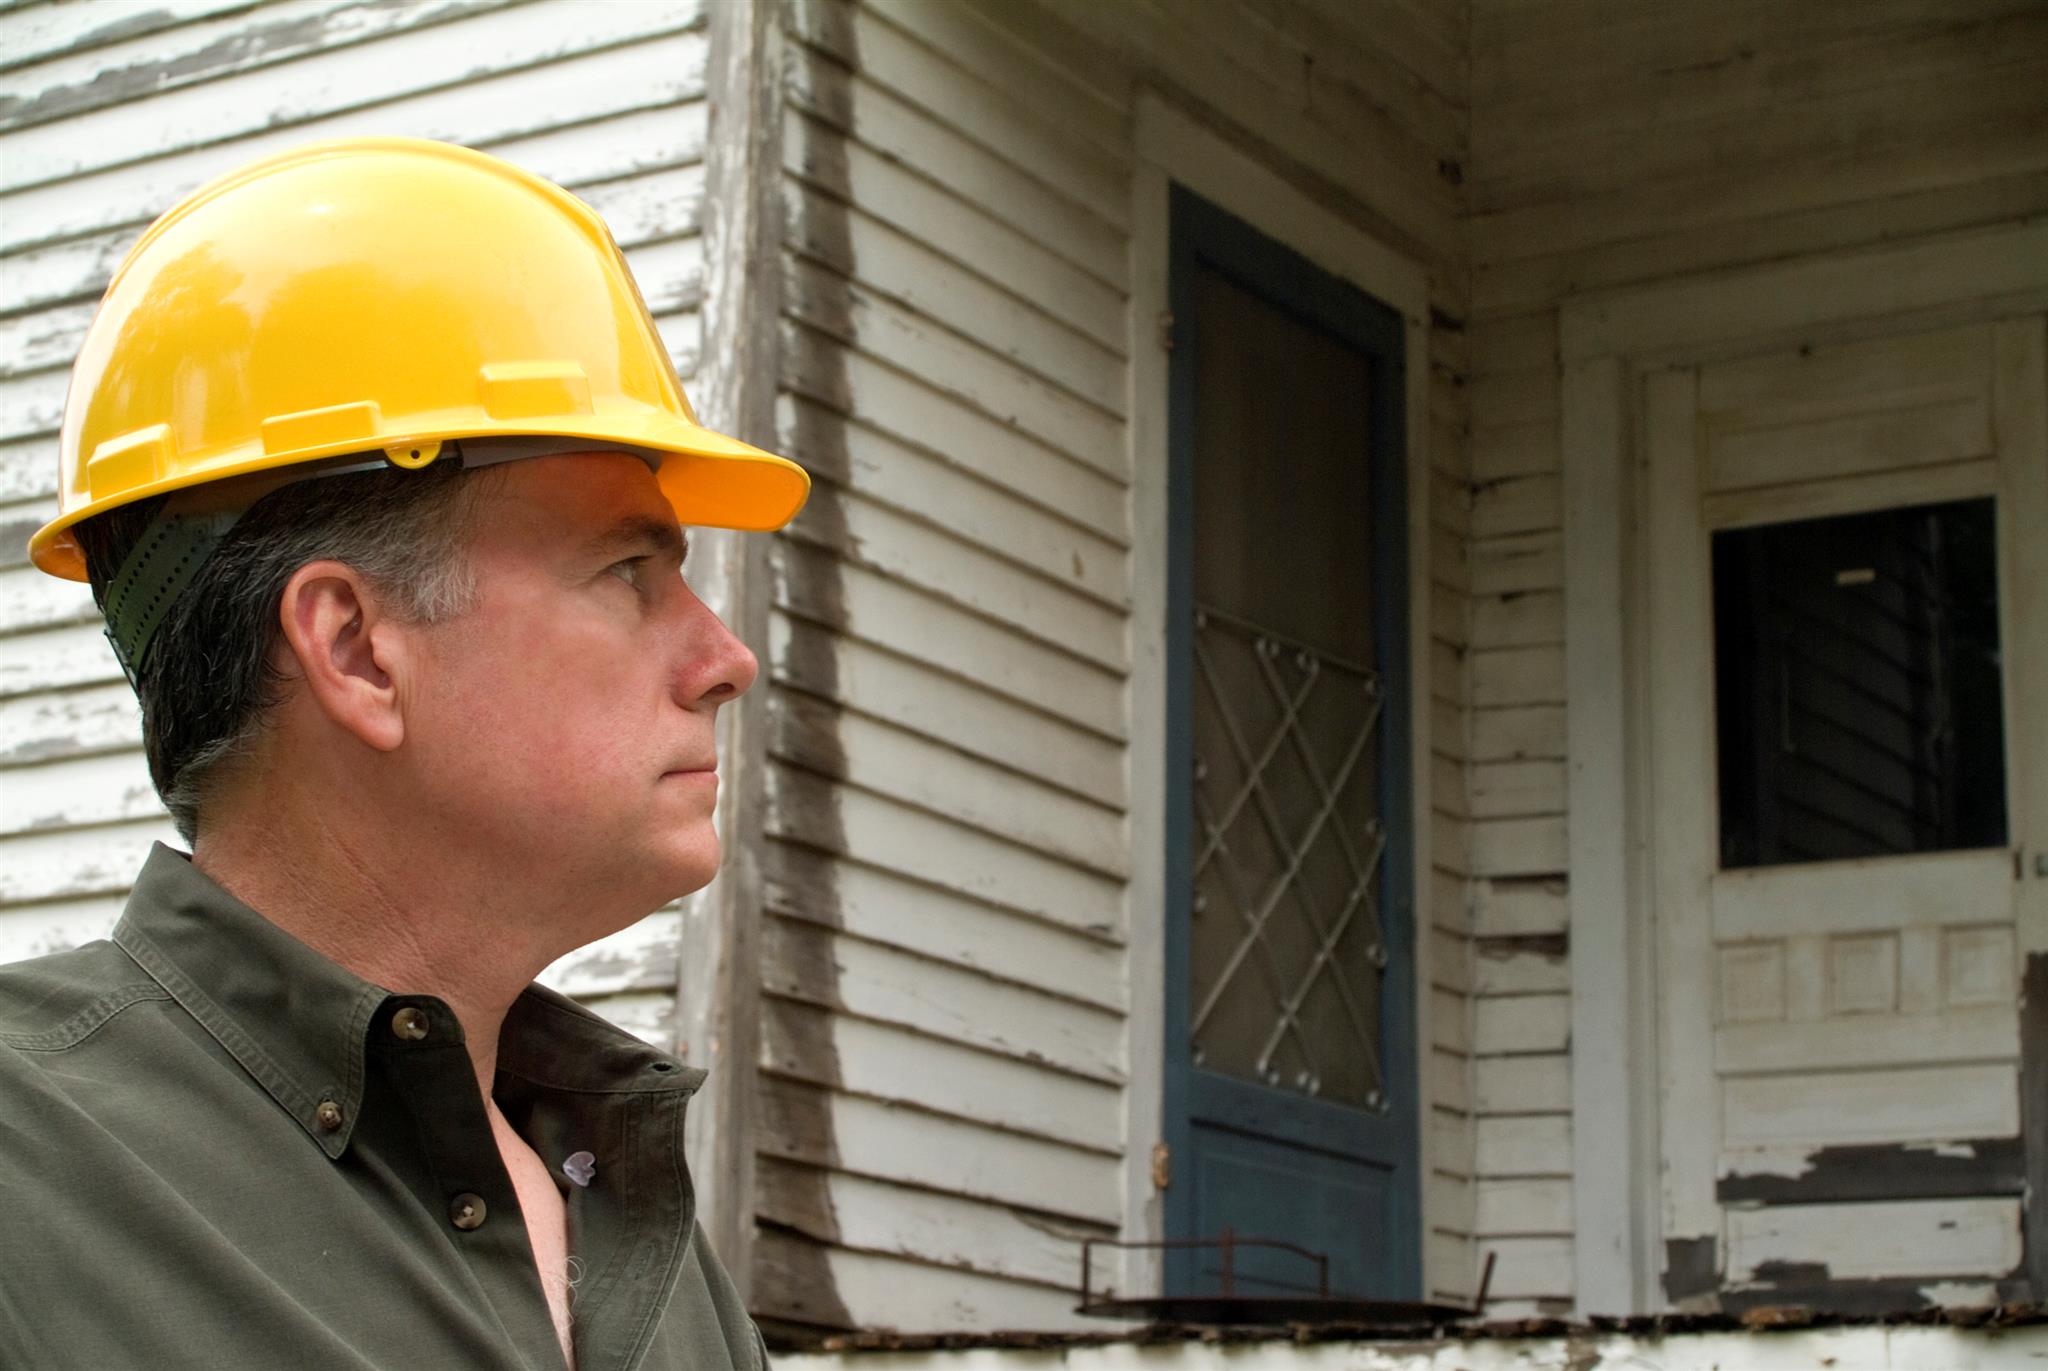 man in yellow hard hat and green shirt in front of dilapidated home